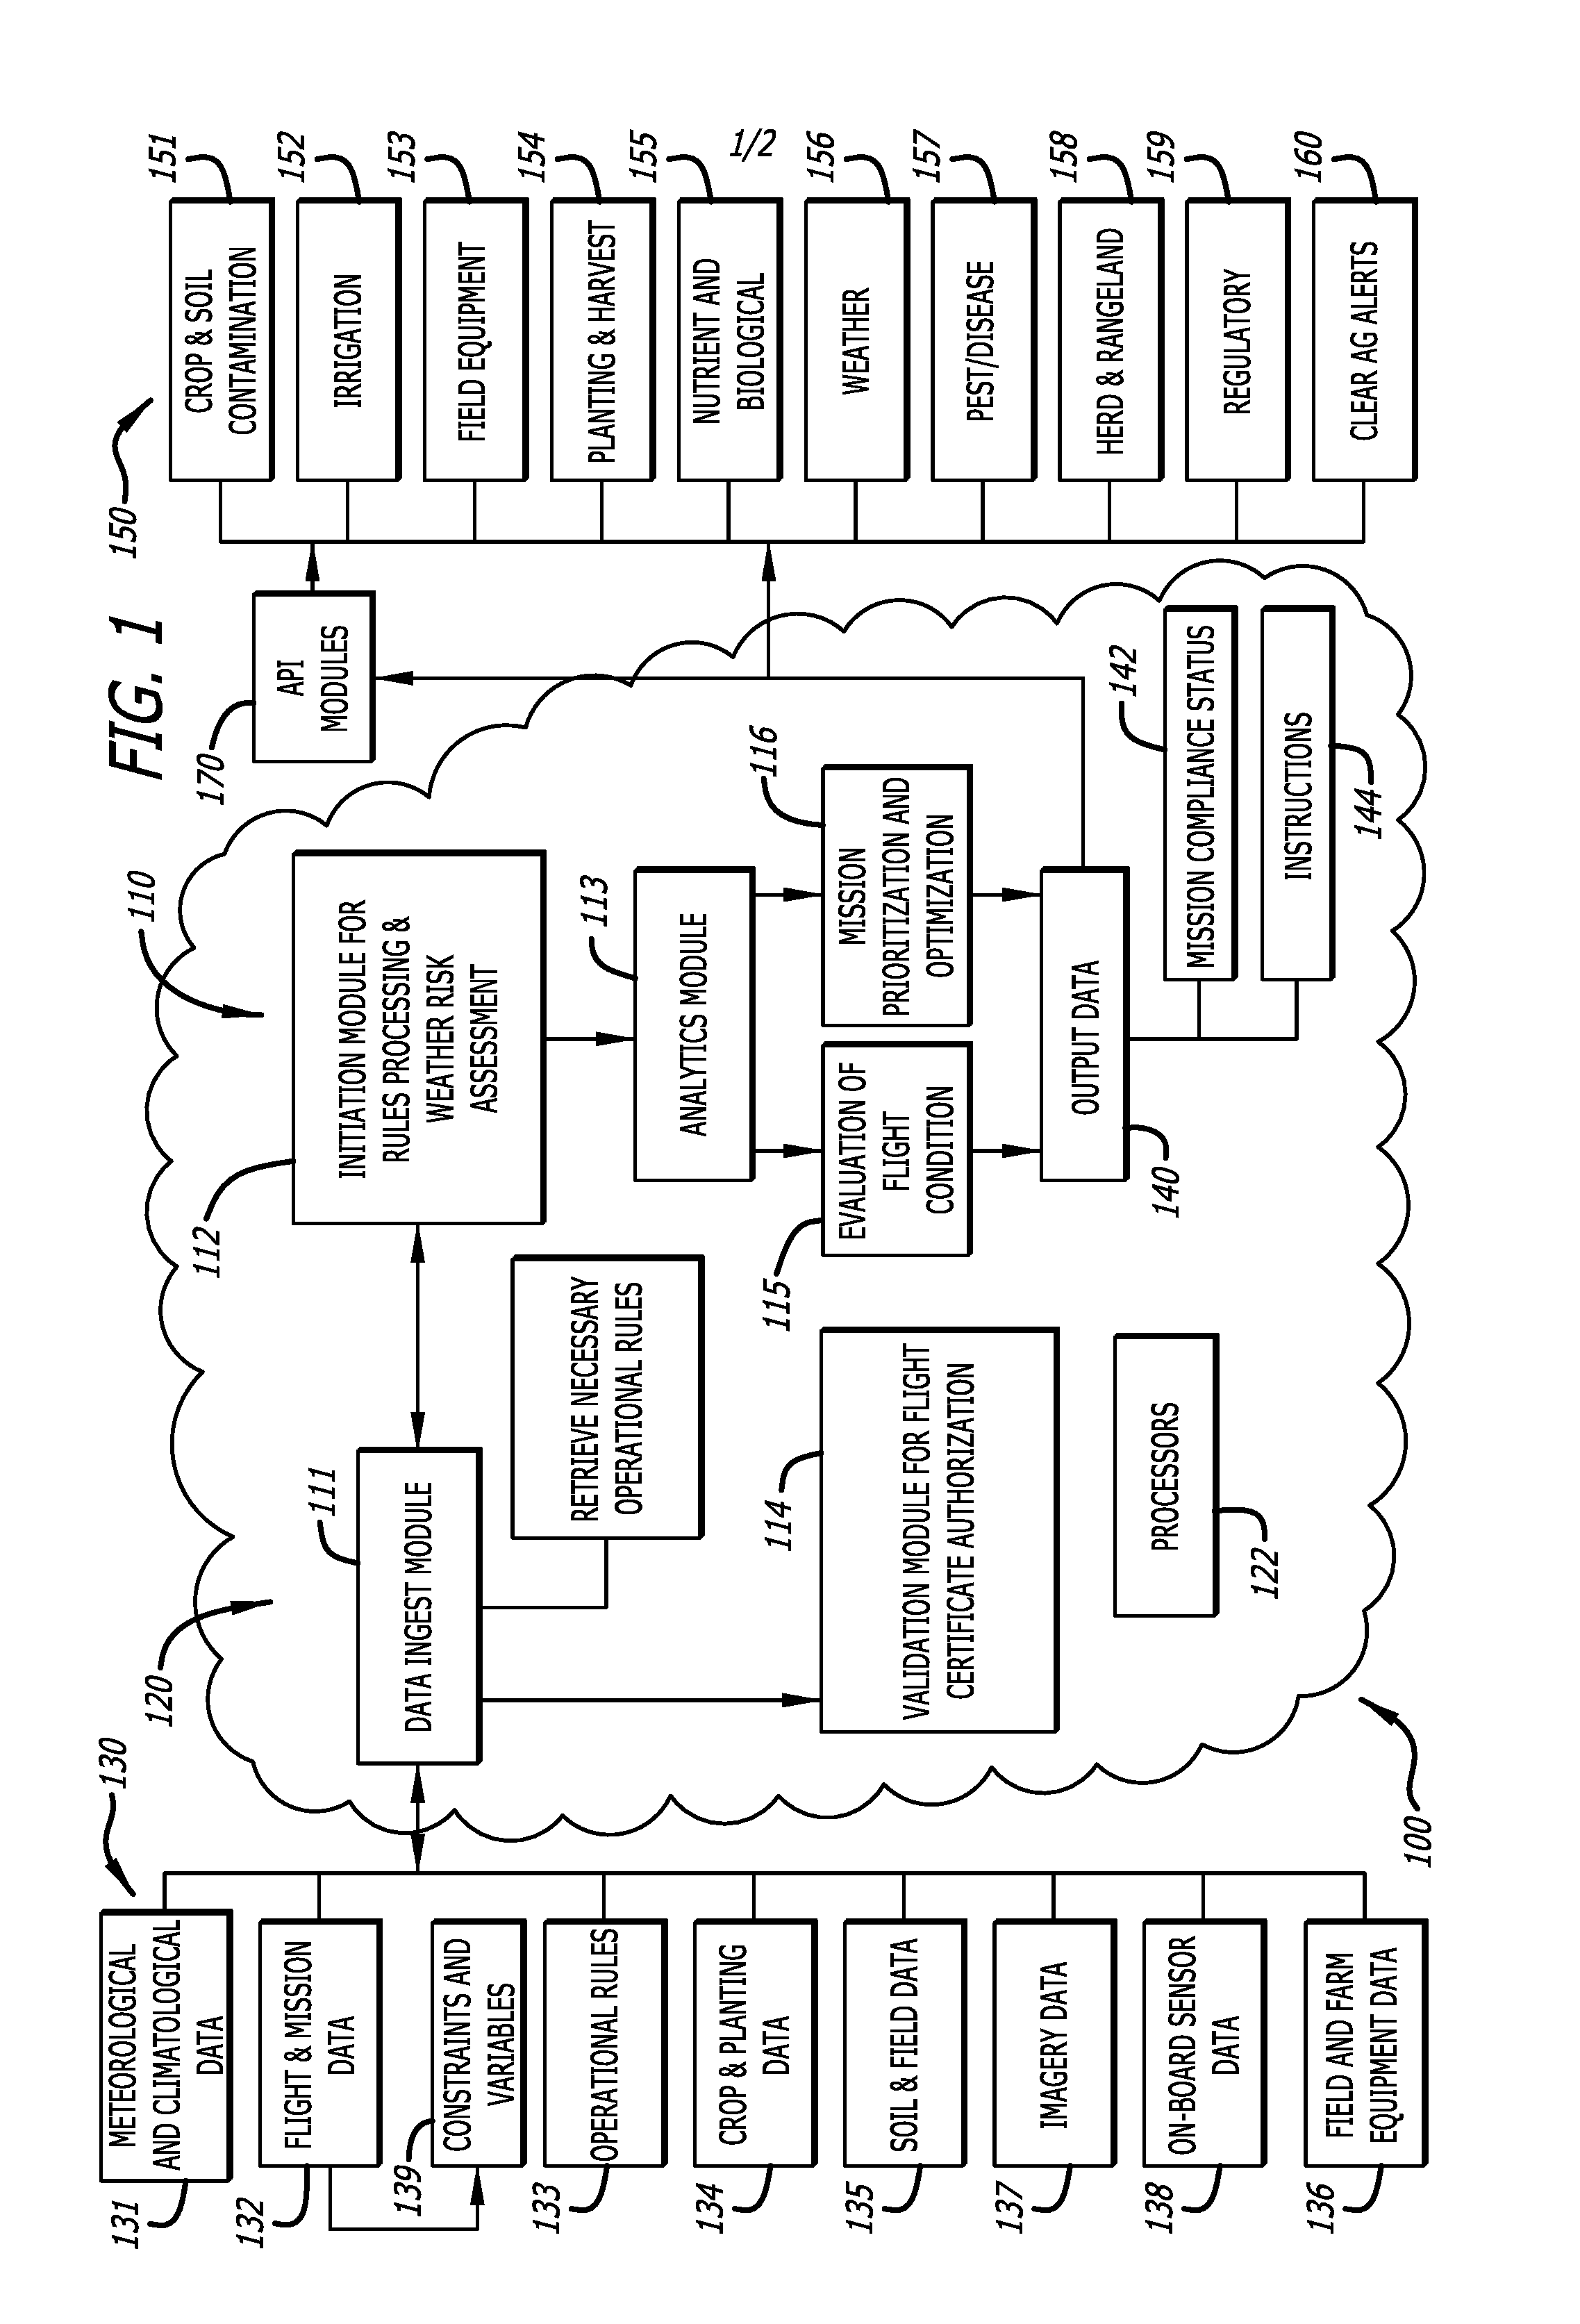 Mission prioritization and work order arrangement for unmanned aerial vehicles and remotely-piloted vehicles